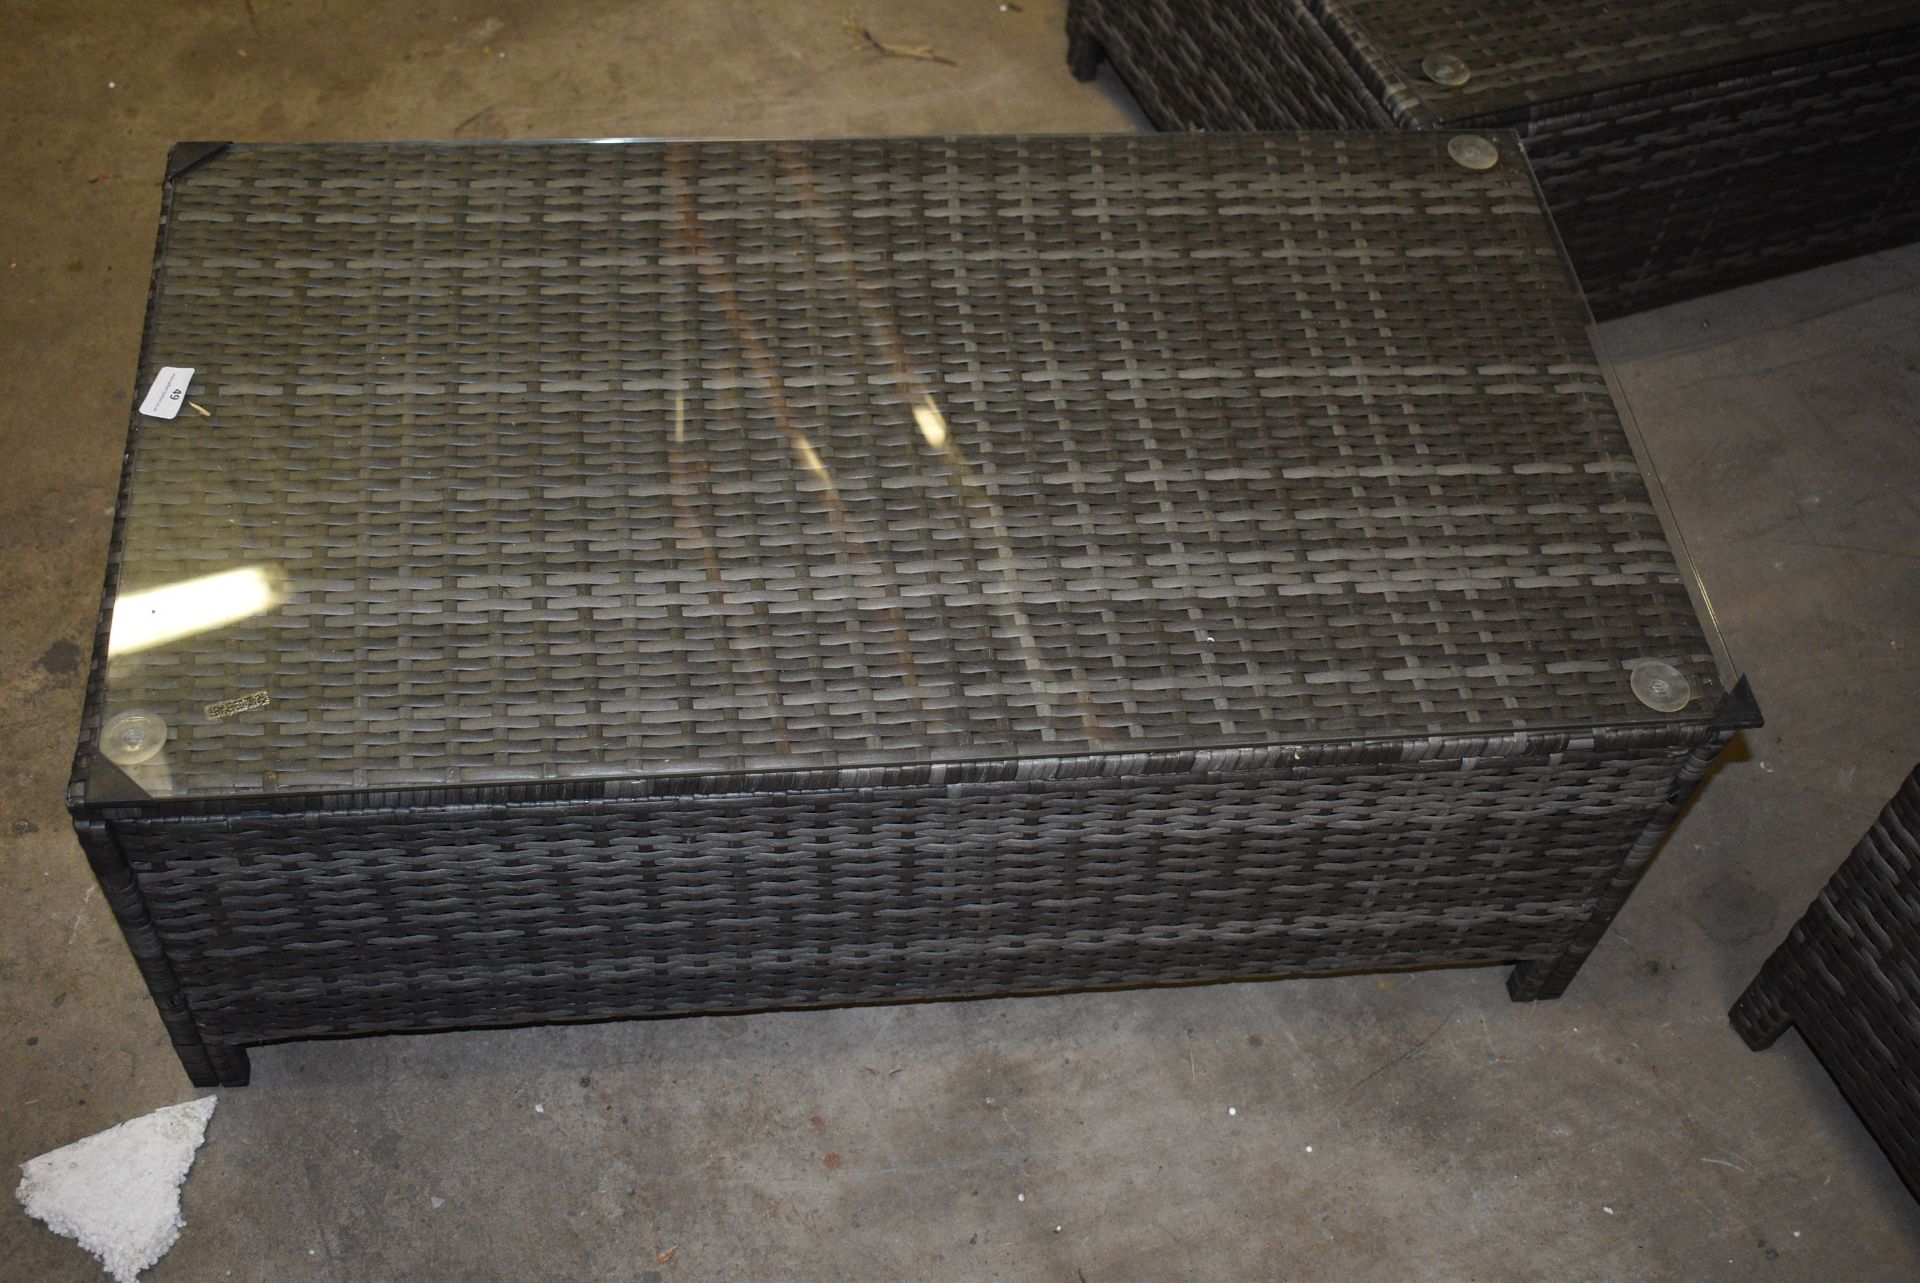 *Abreo Rattan Occasional Table with Glass Top